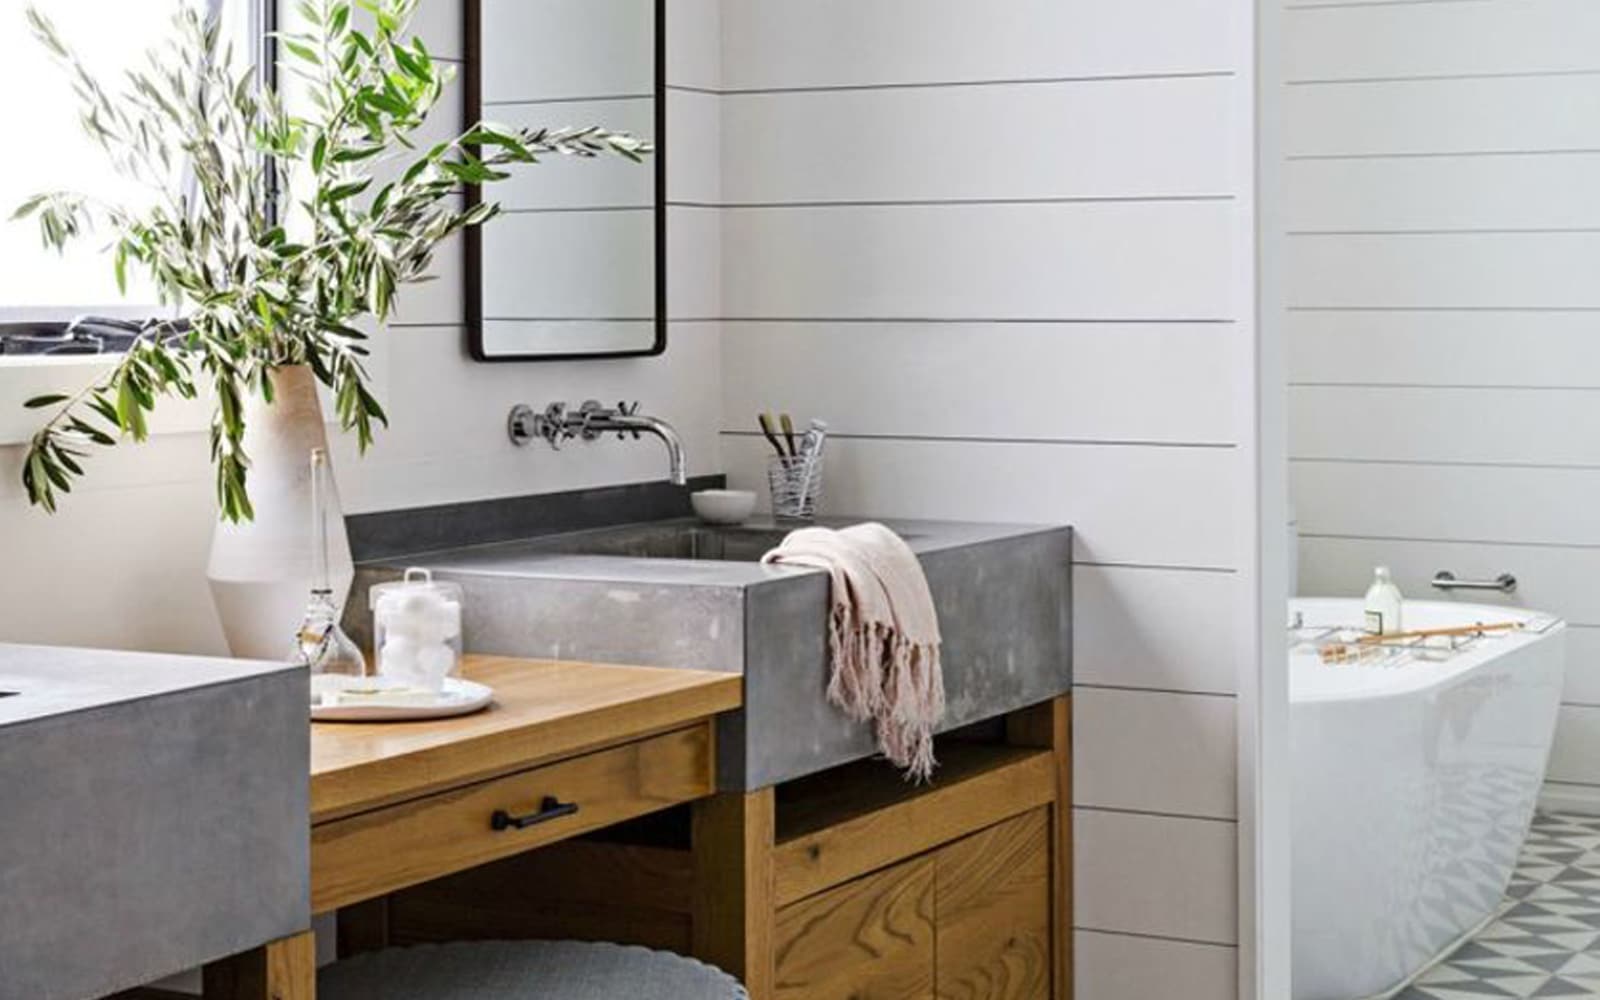 Our half bath design is up today on The Fresh Exchange. Inspiration for a Half Bath done in a Modern Farmhouse style.